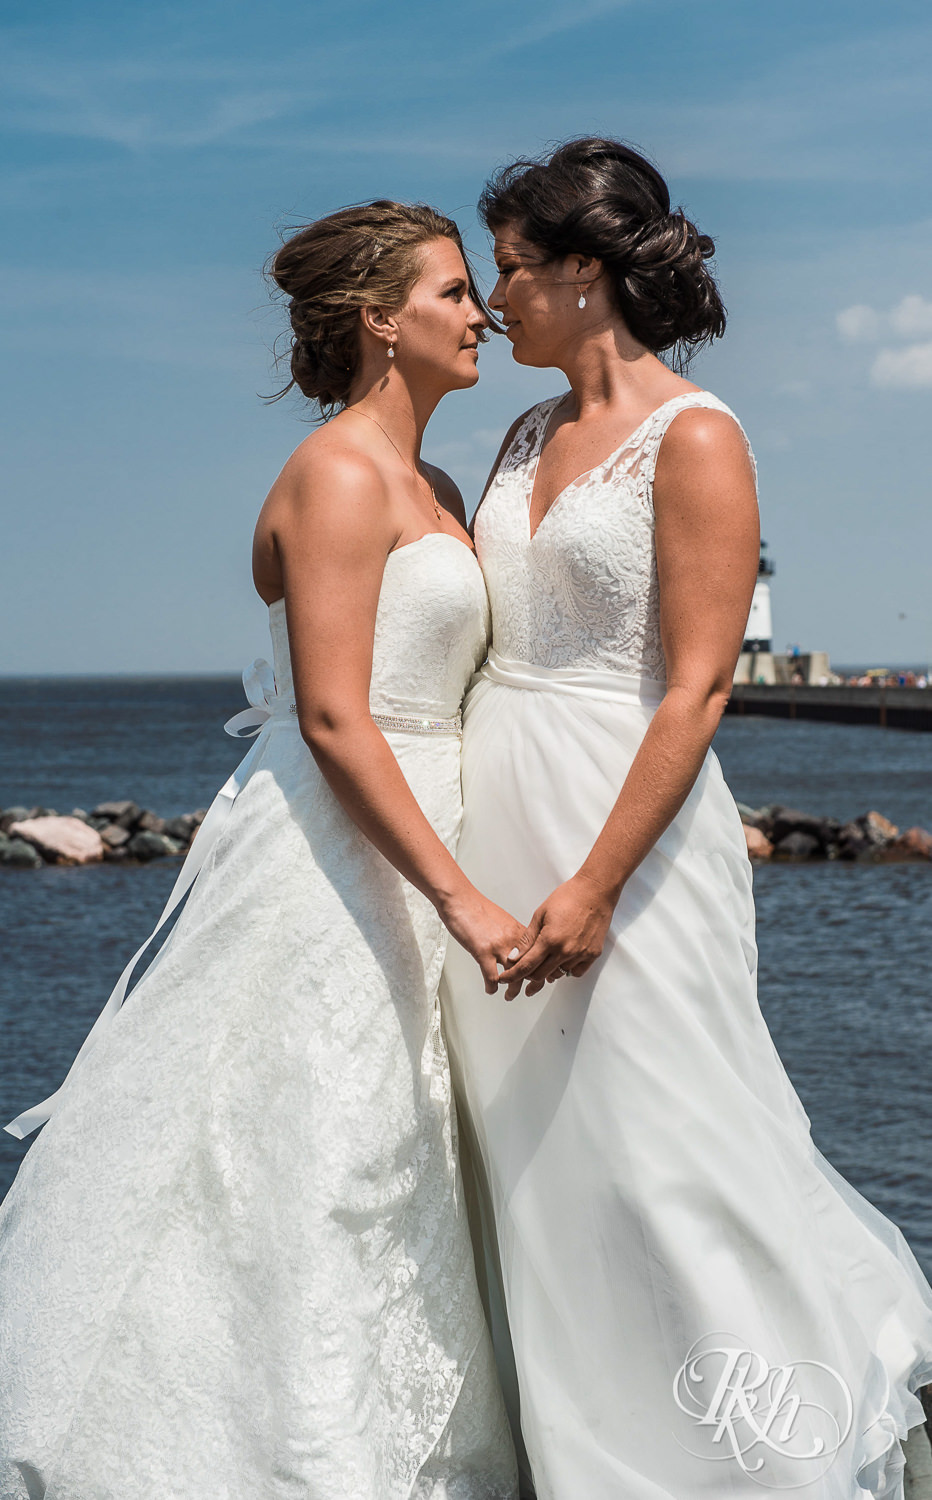 Lesbian brides smile on the shore of Lake Superior in Duluth, Minnesota.